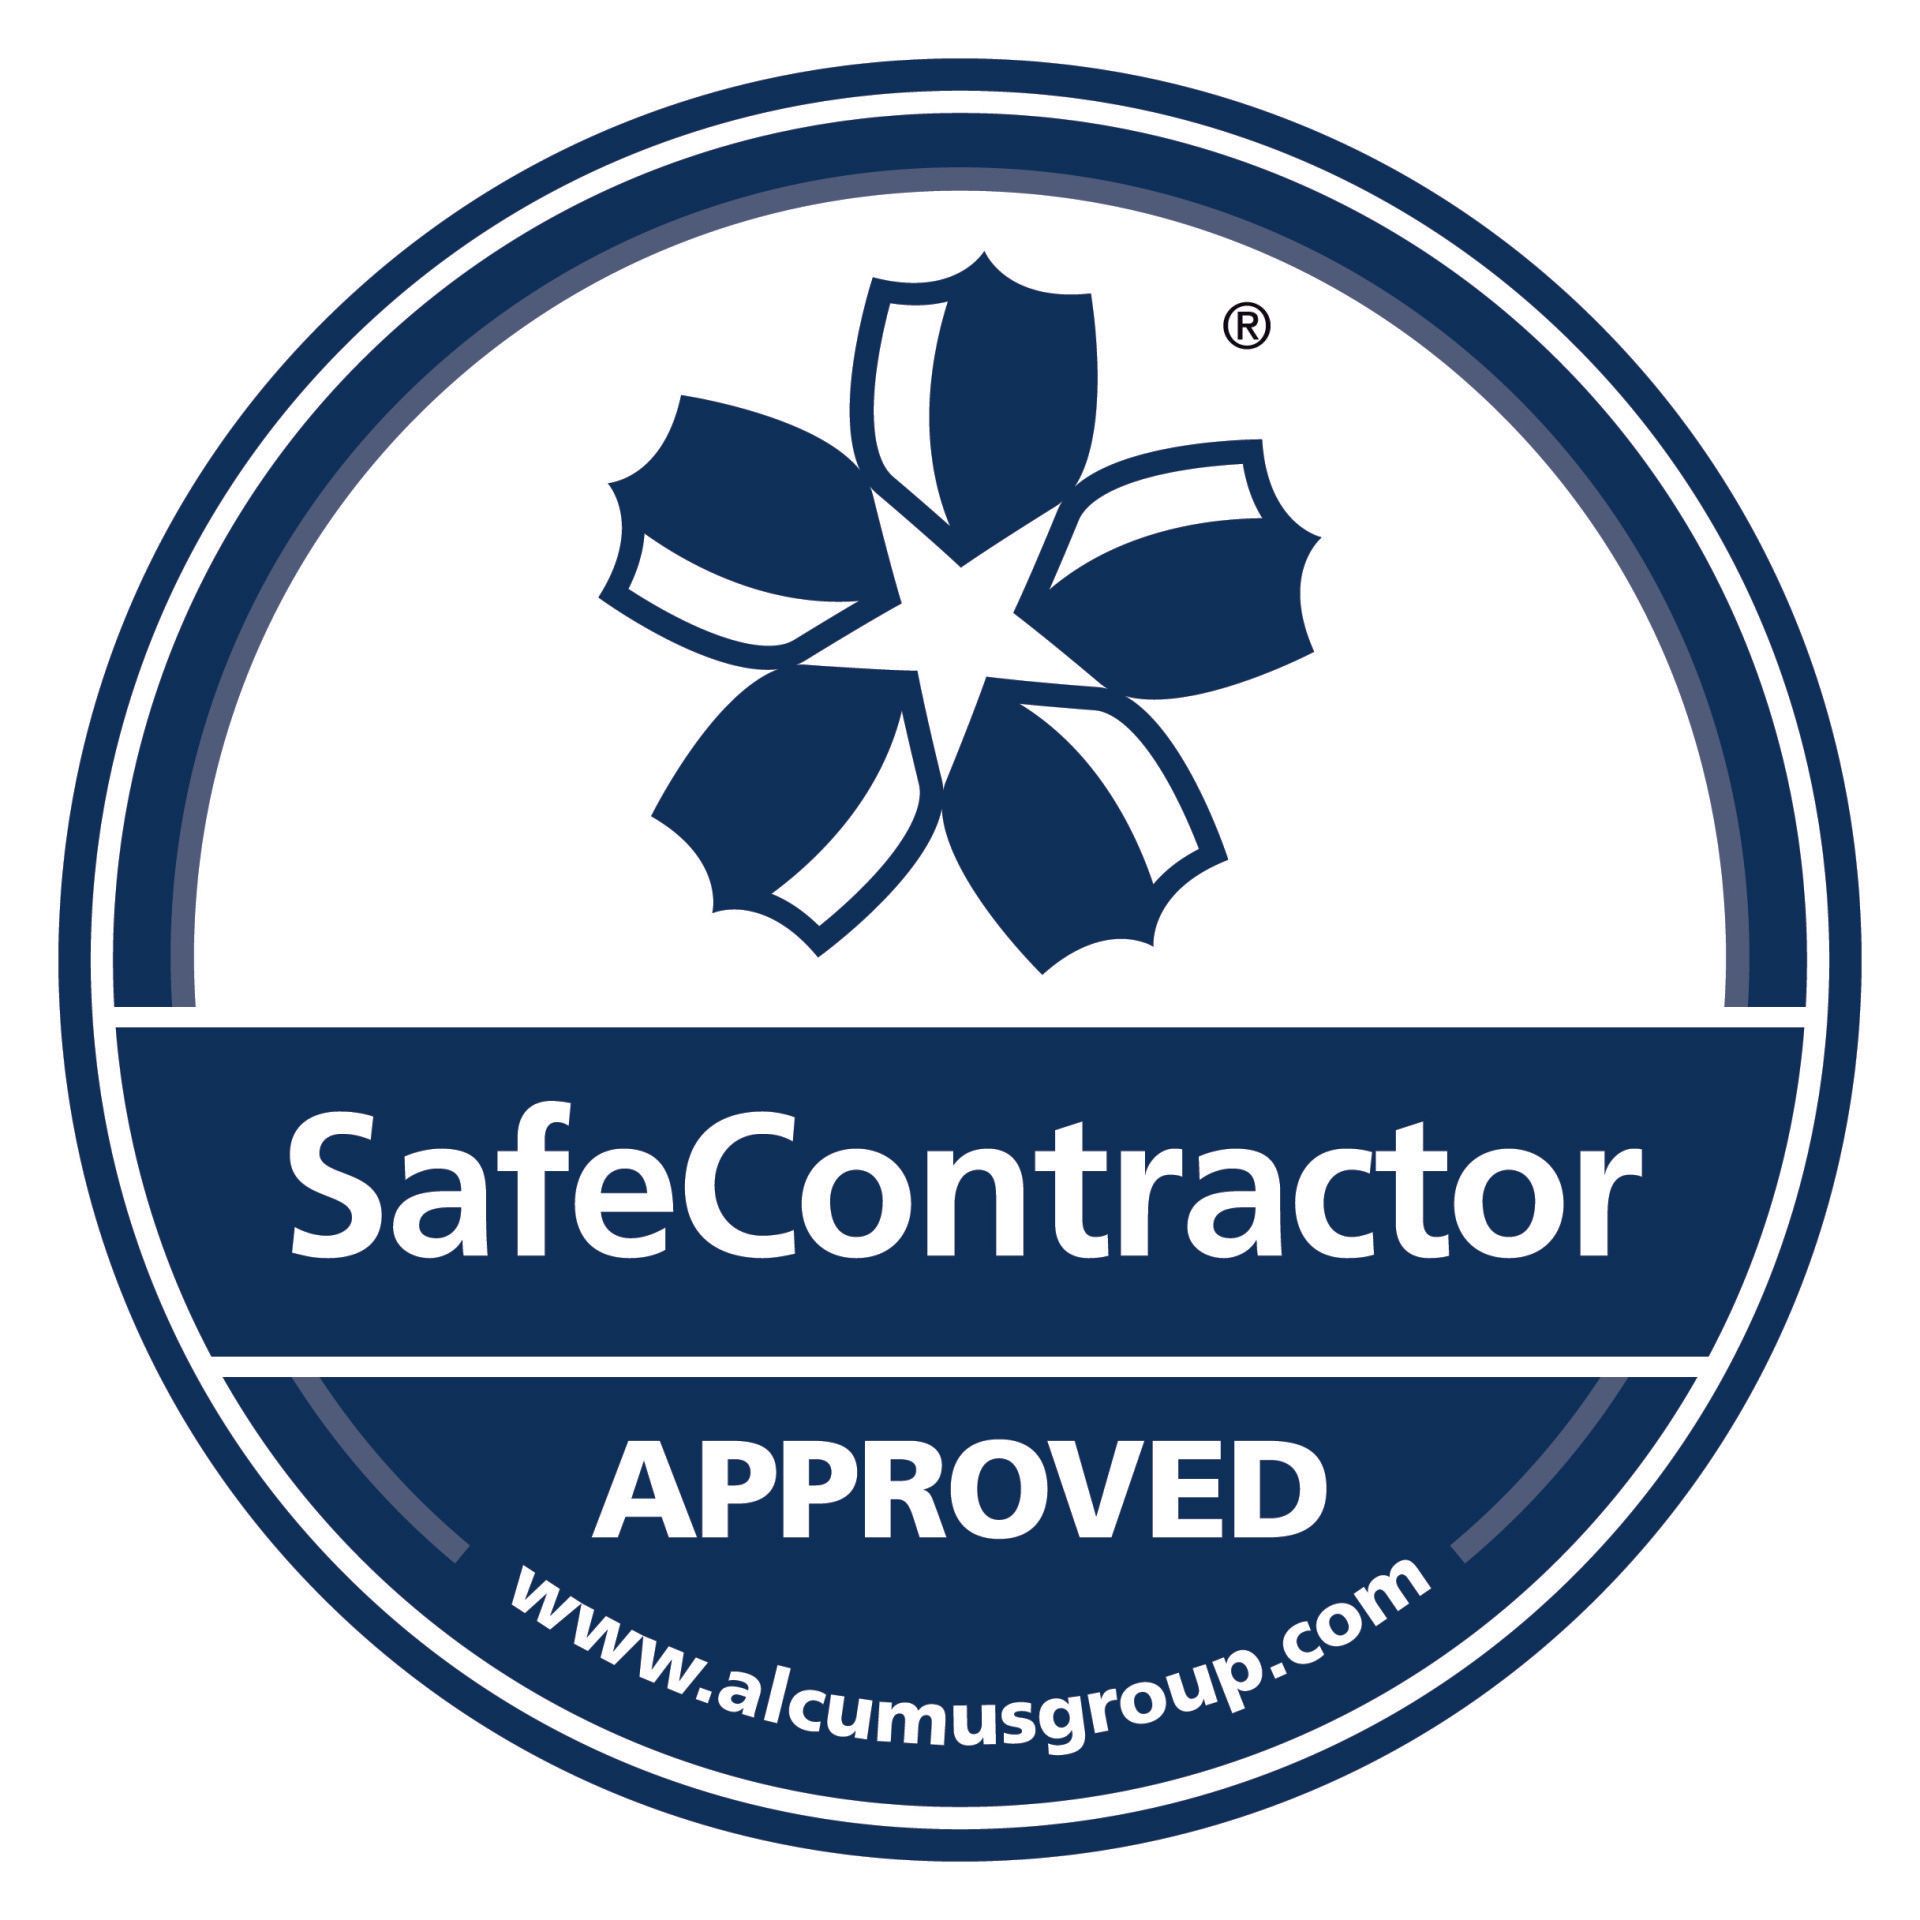 Pullman Instruments' Safe Contractor Accreditation